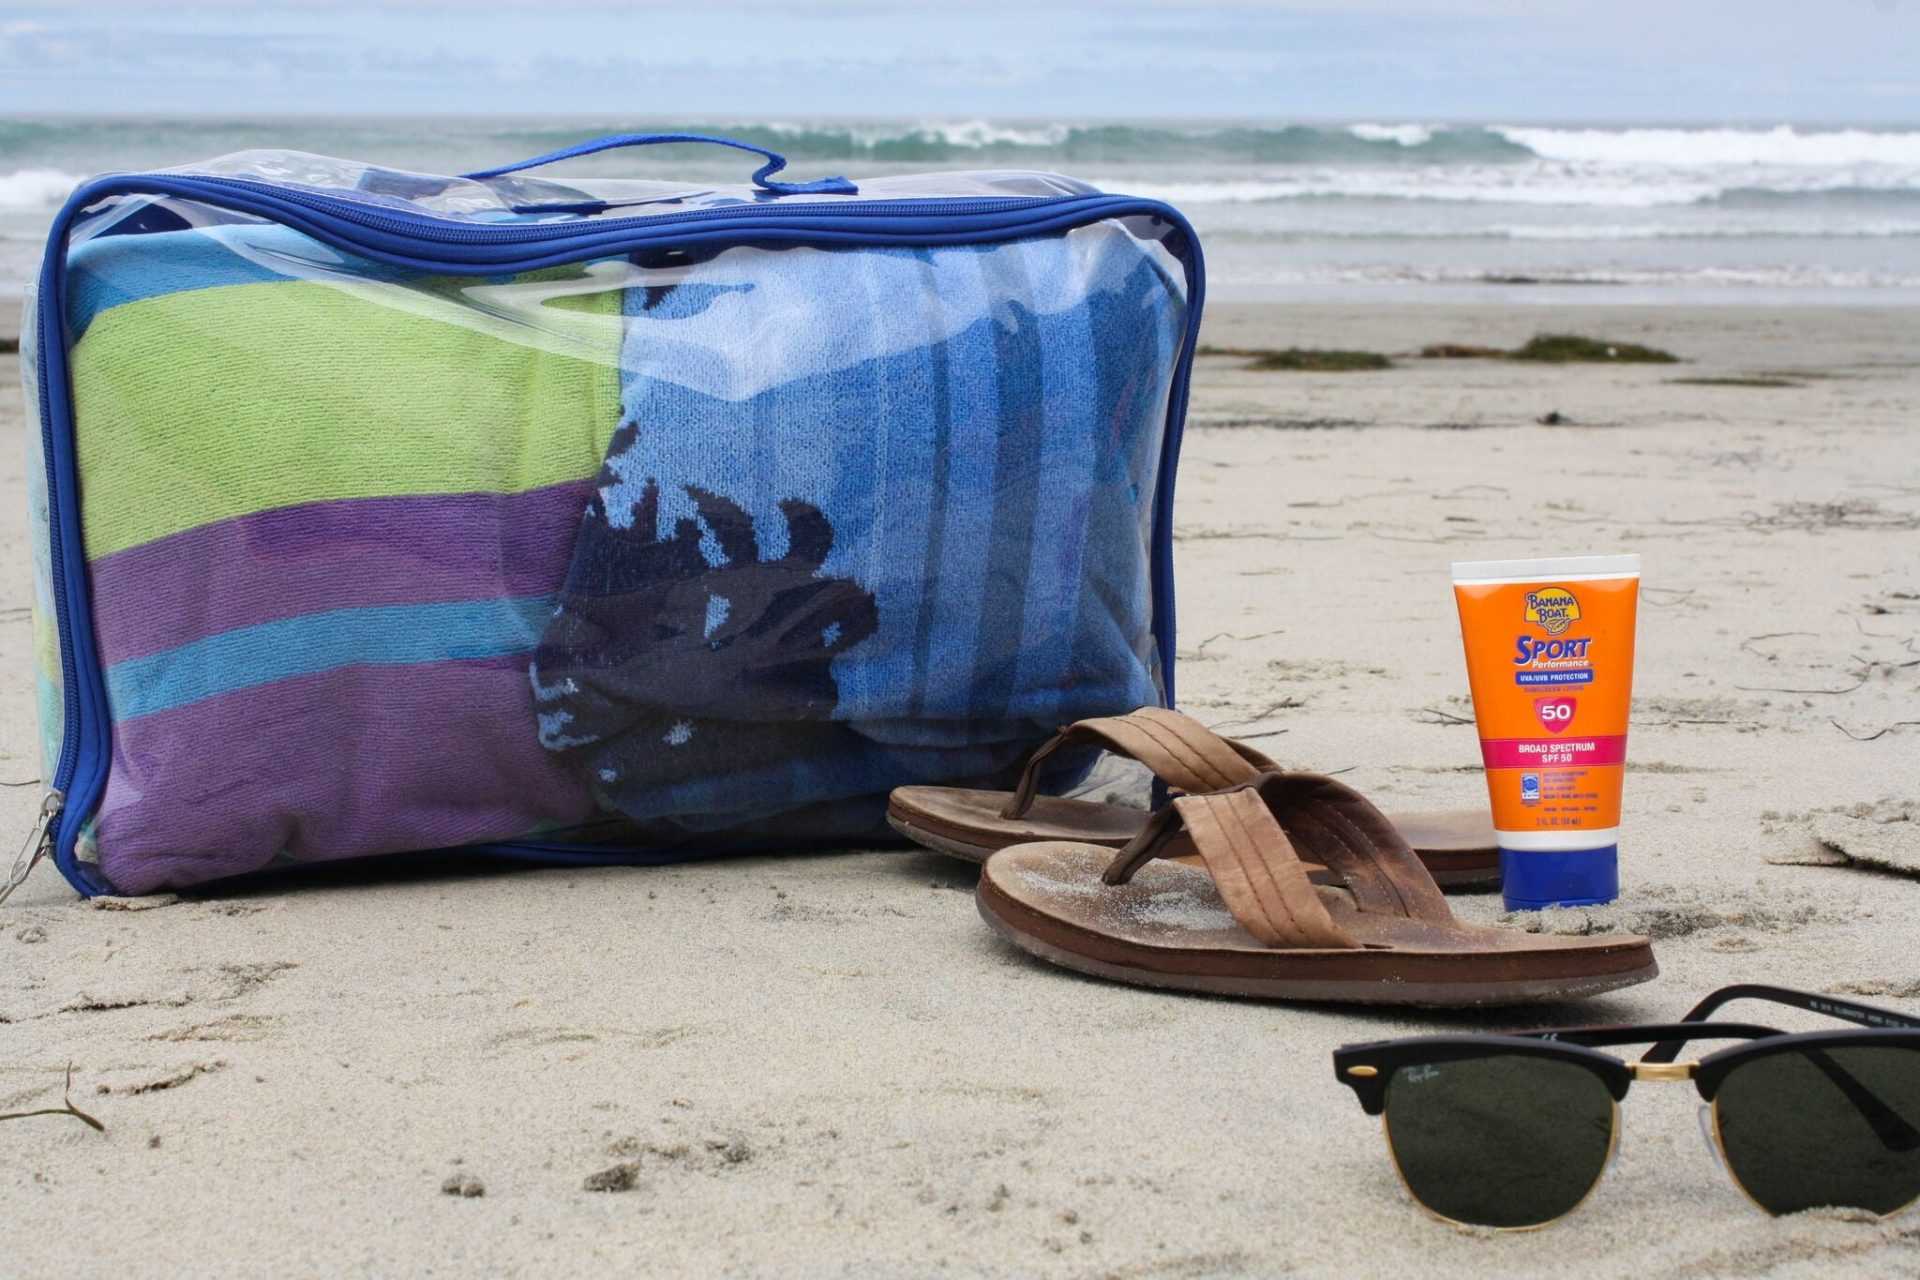 Blue large packing cube as a beach tote bag